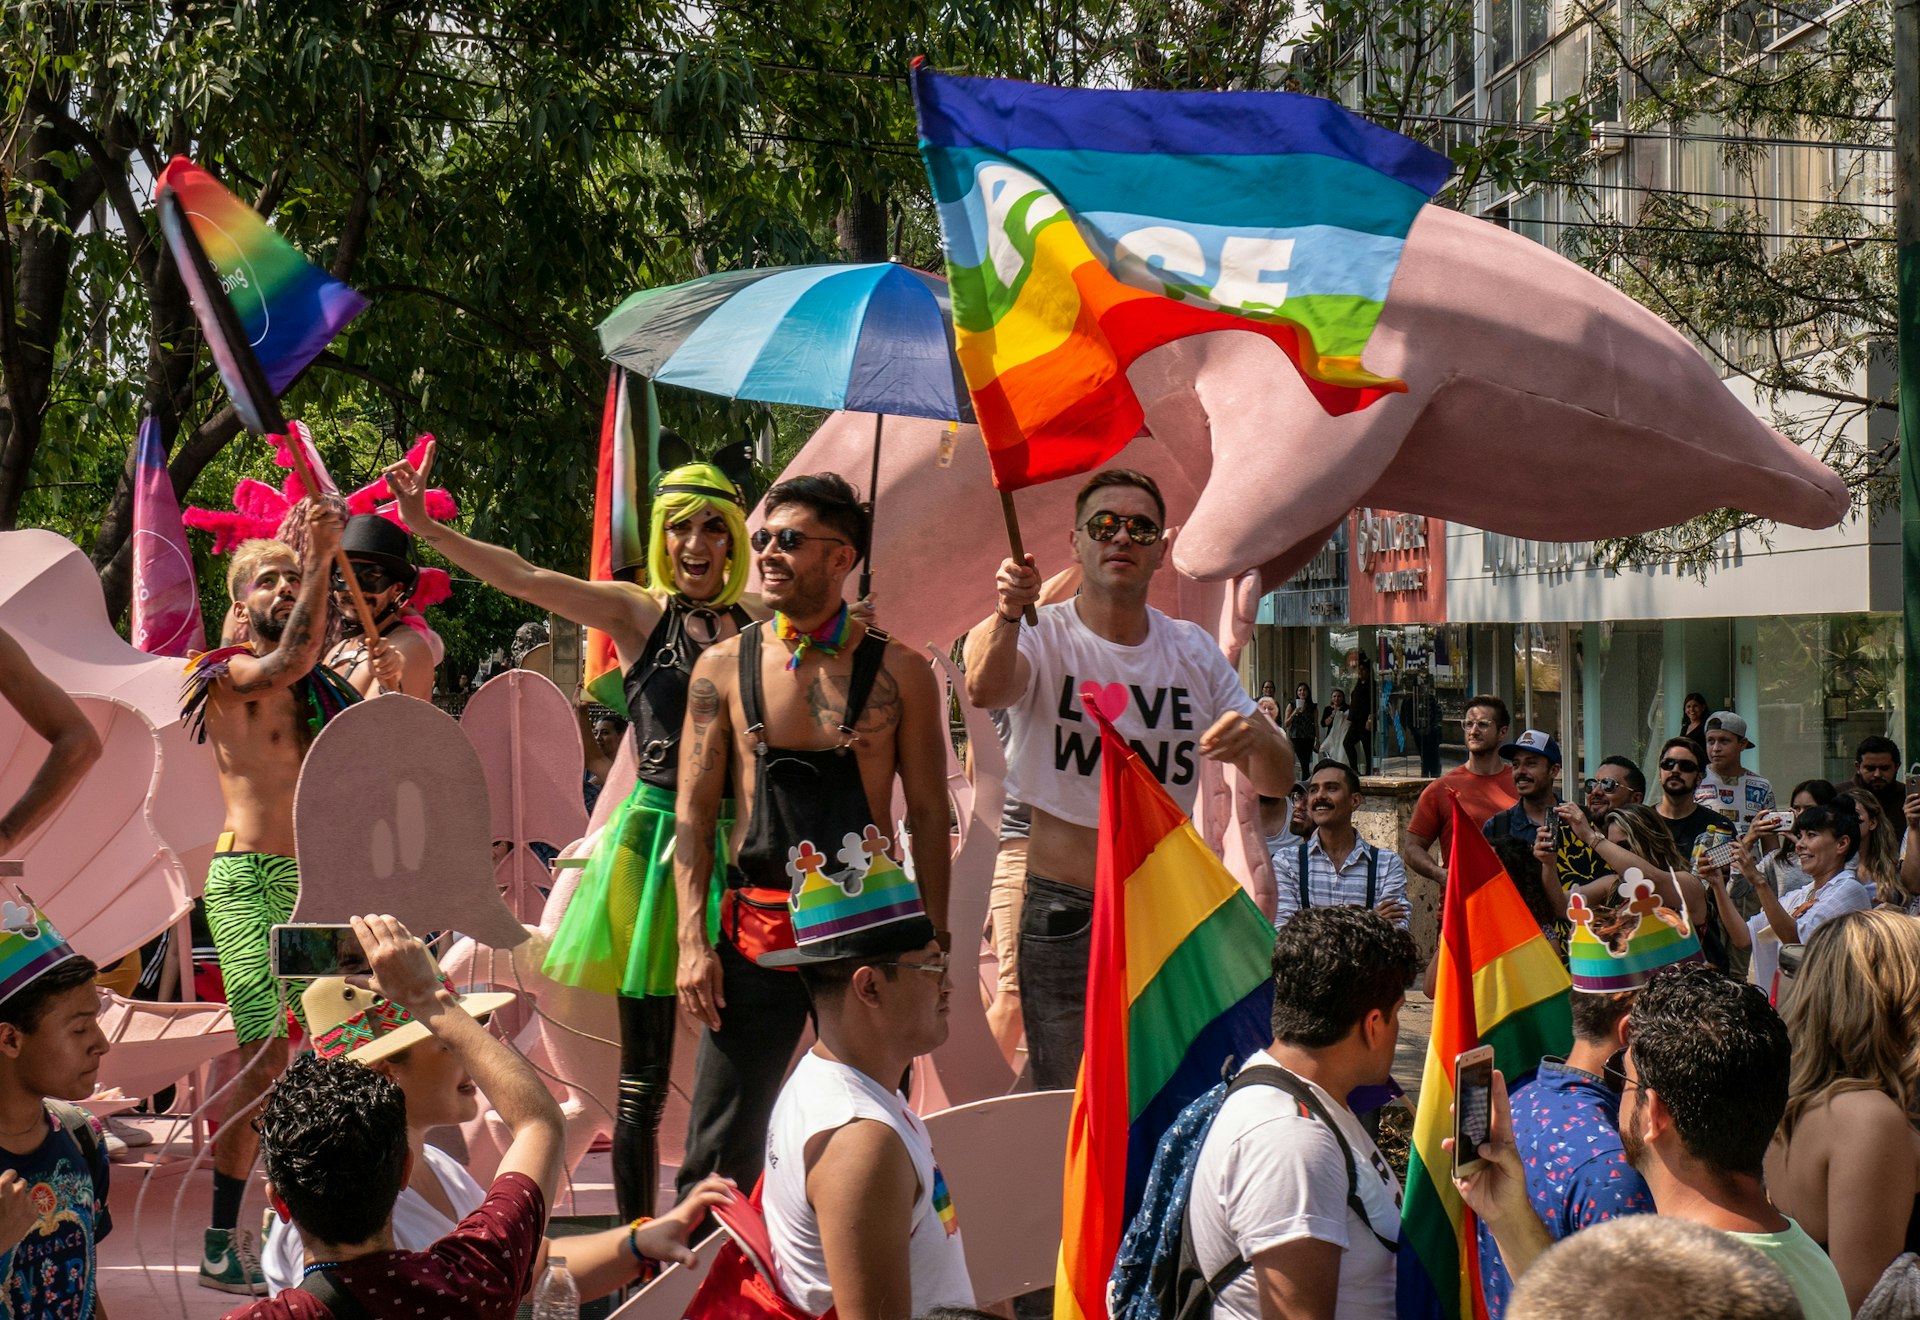 A float full of people celebrating and waving rainbow flags during the Pride Parade in Guadalajara, Jalisco, Mexico